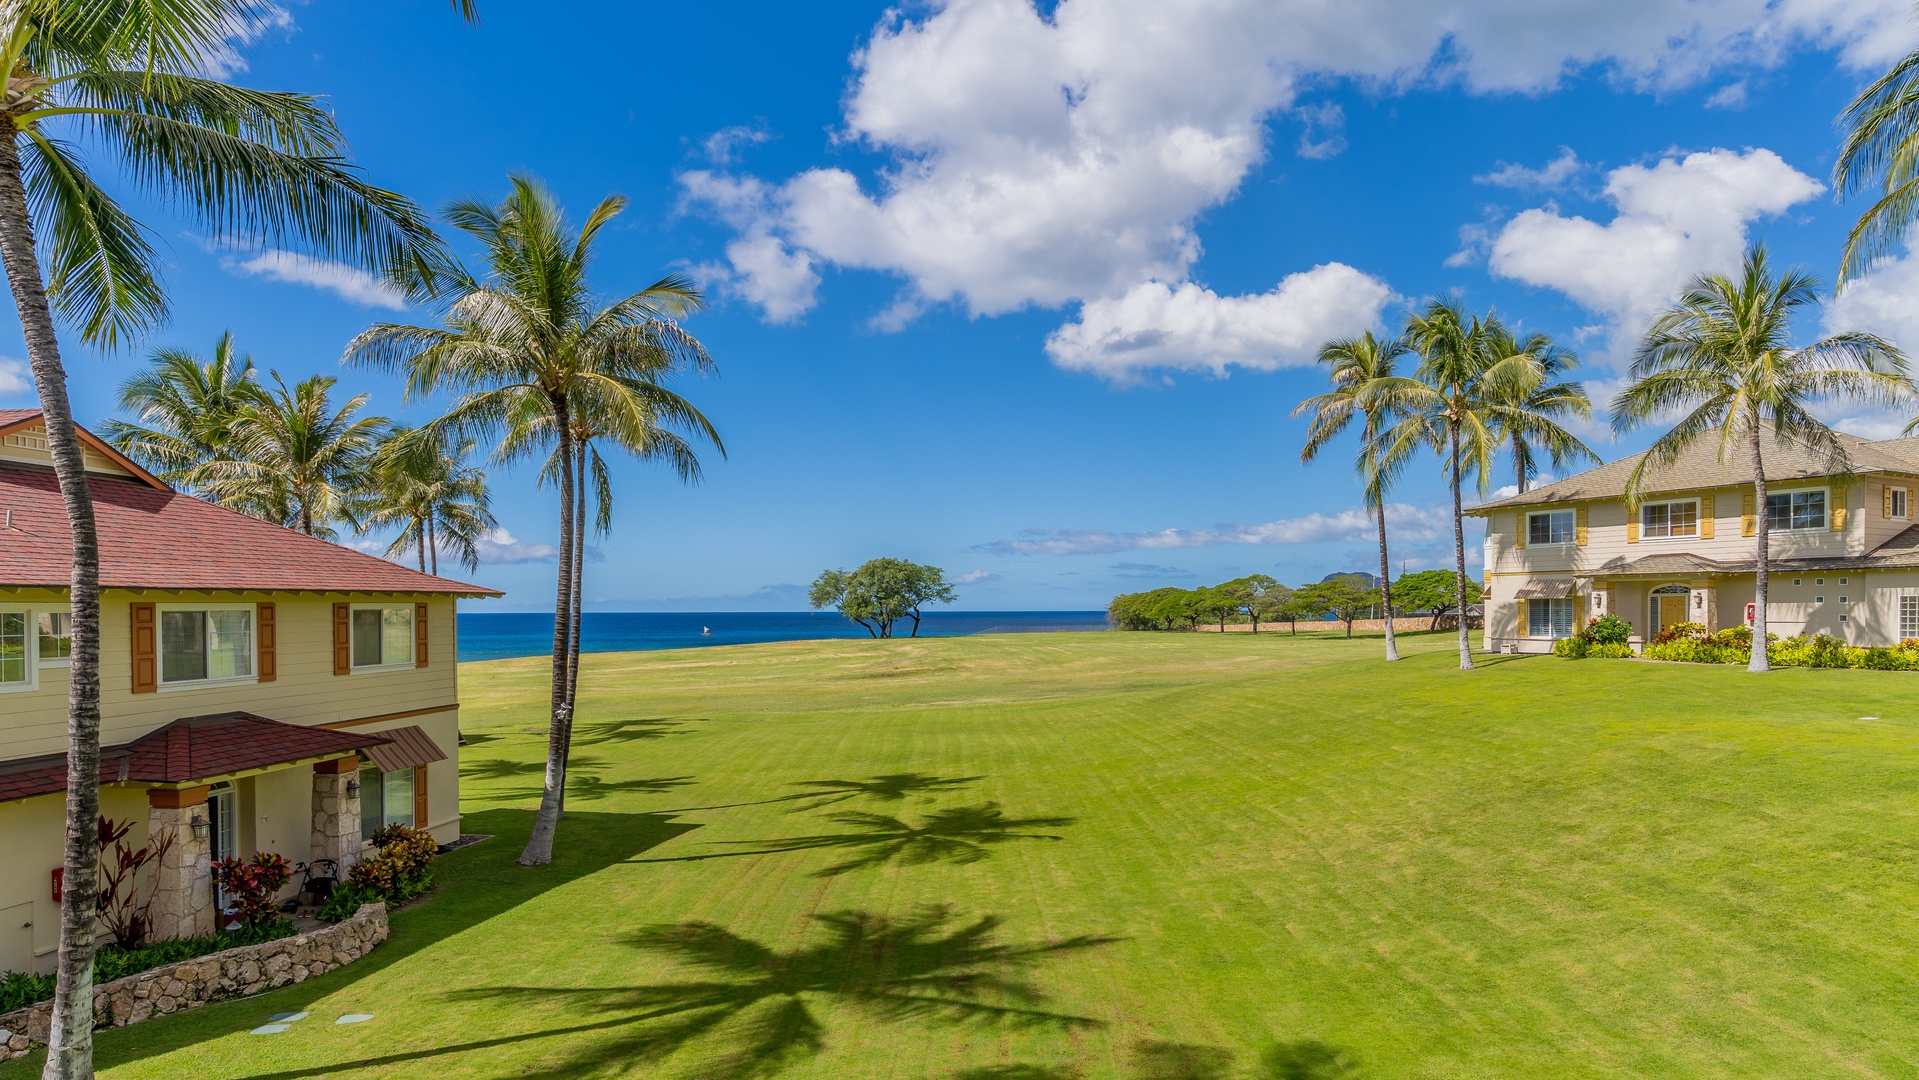 Kapolei Vacation Rentals, Kai Lani 20C - Another lovely view from the condo.